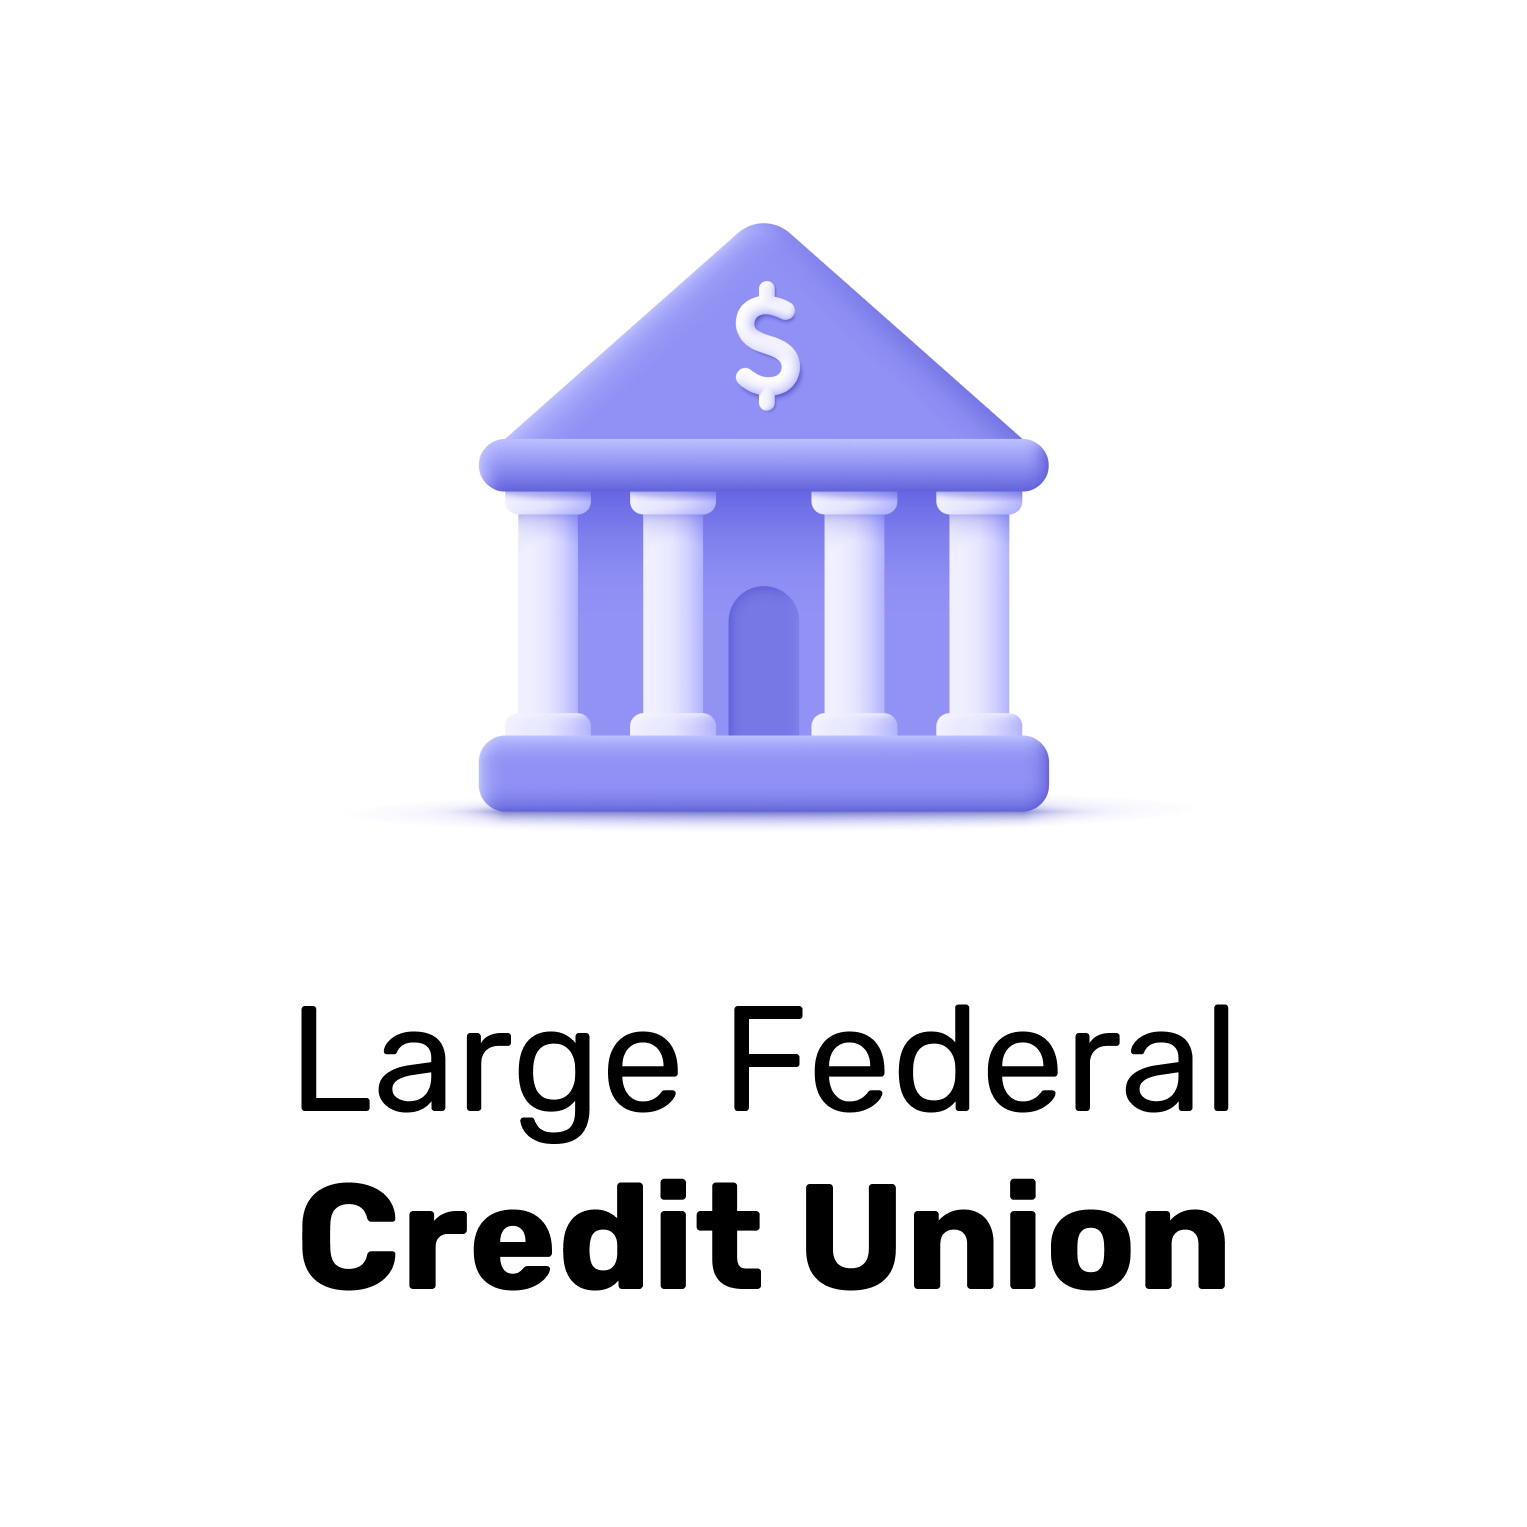 Large Federal Credit Union